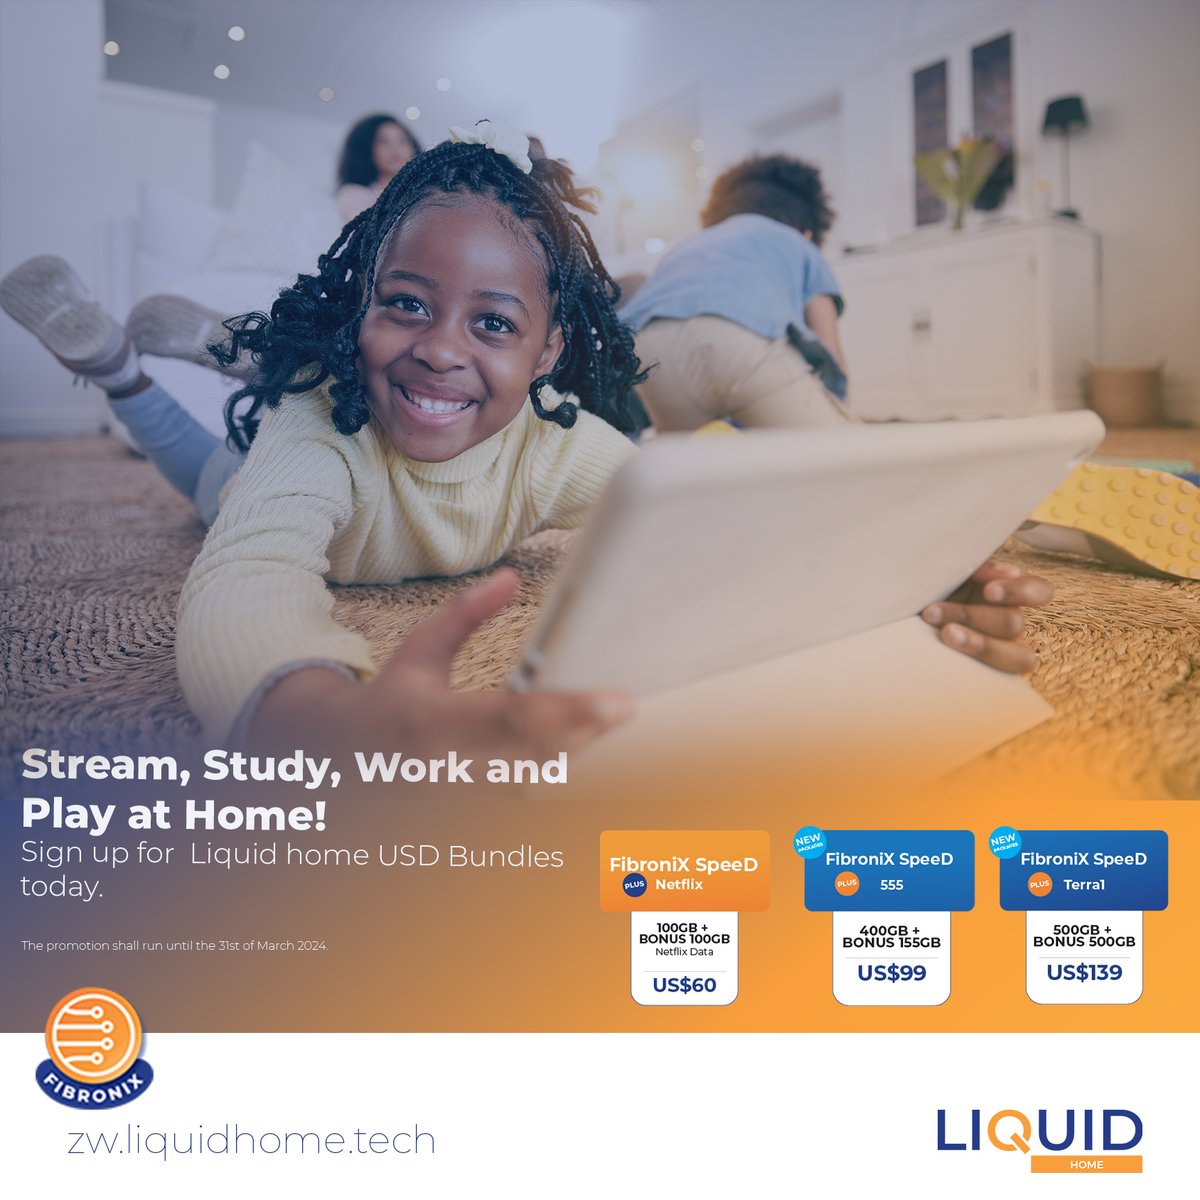 Embrace the ultimate in convenience! Stream, study, work, and play from the comfort of your home. Take advantage of the incredible Liquid Home USD Bundles promotion Sign up now! loom.ly/met8TGM #LiquidHome #USDInternetBundles #wherespeedlives